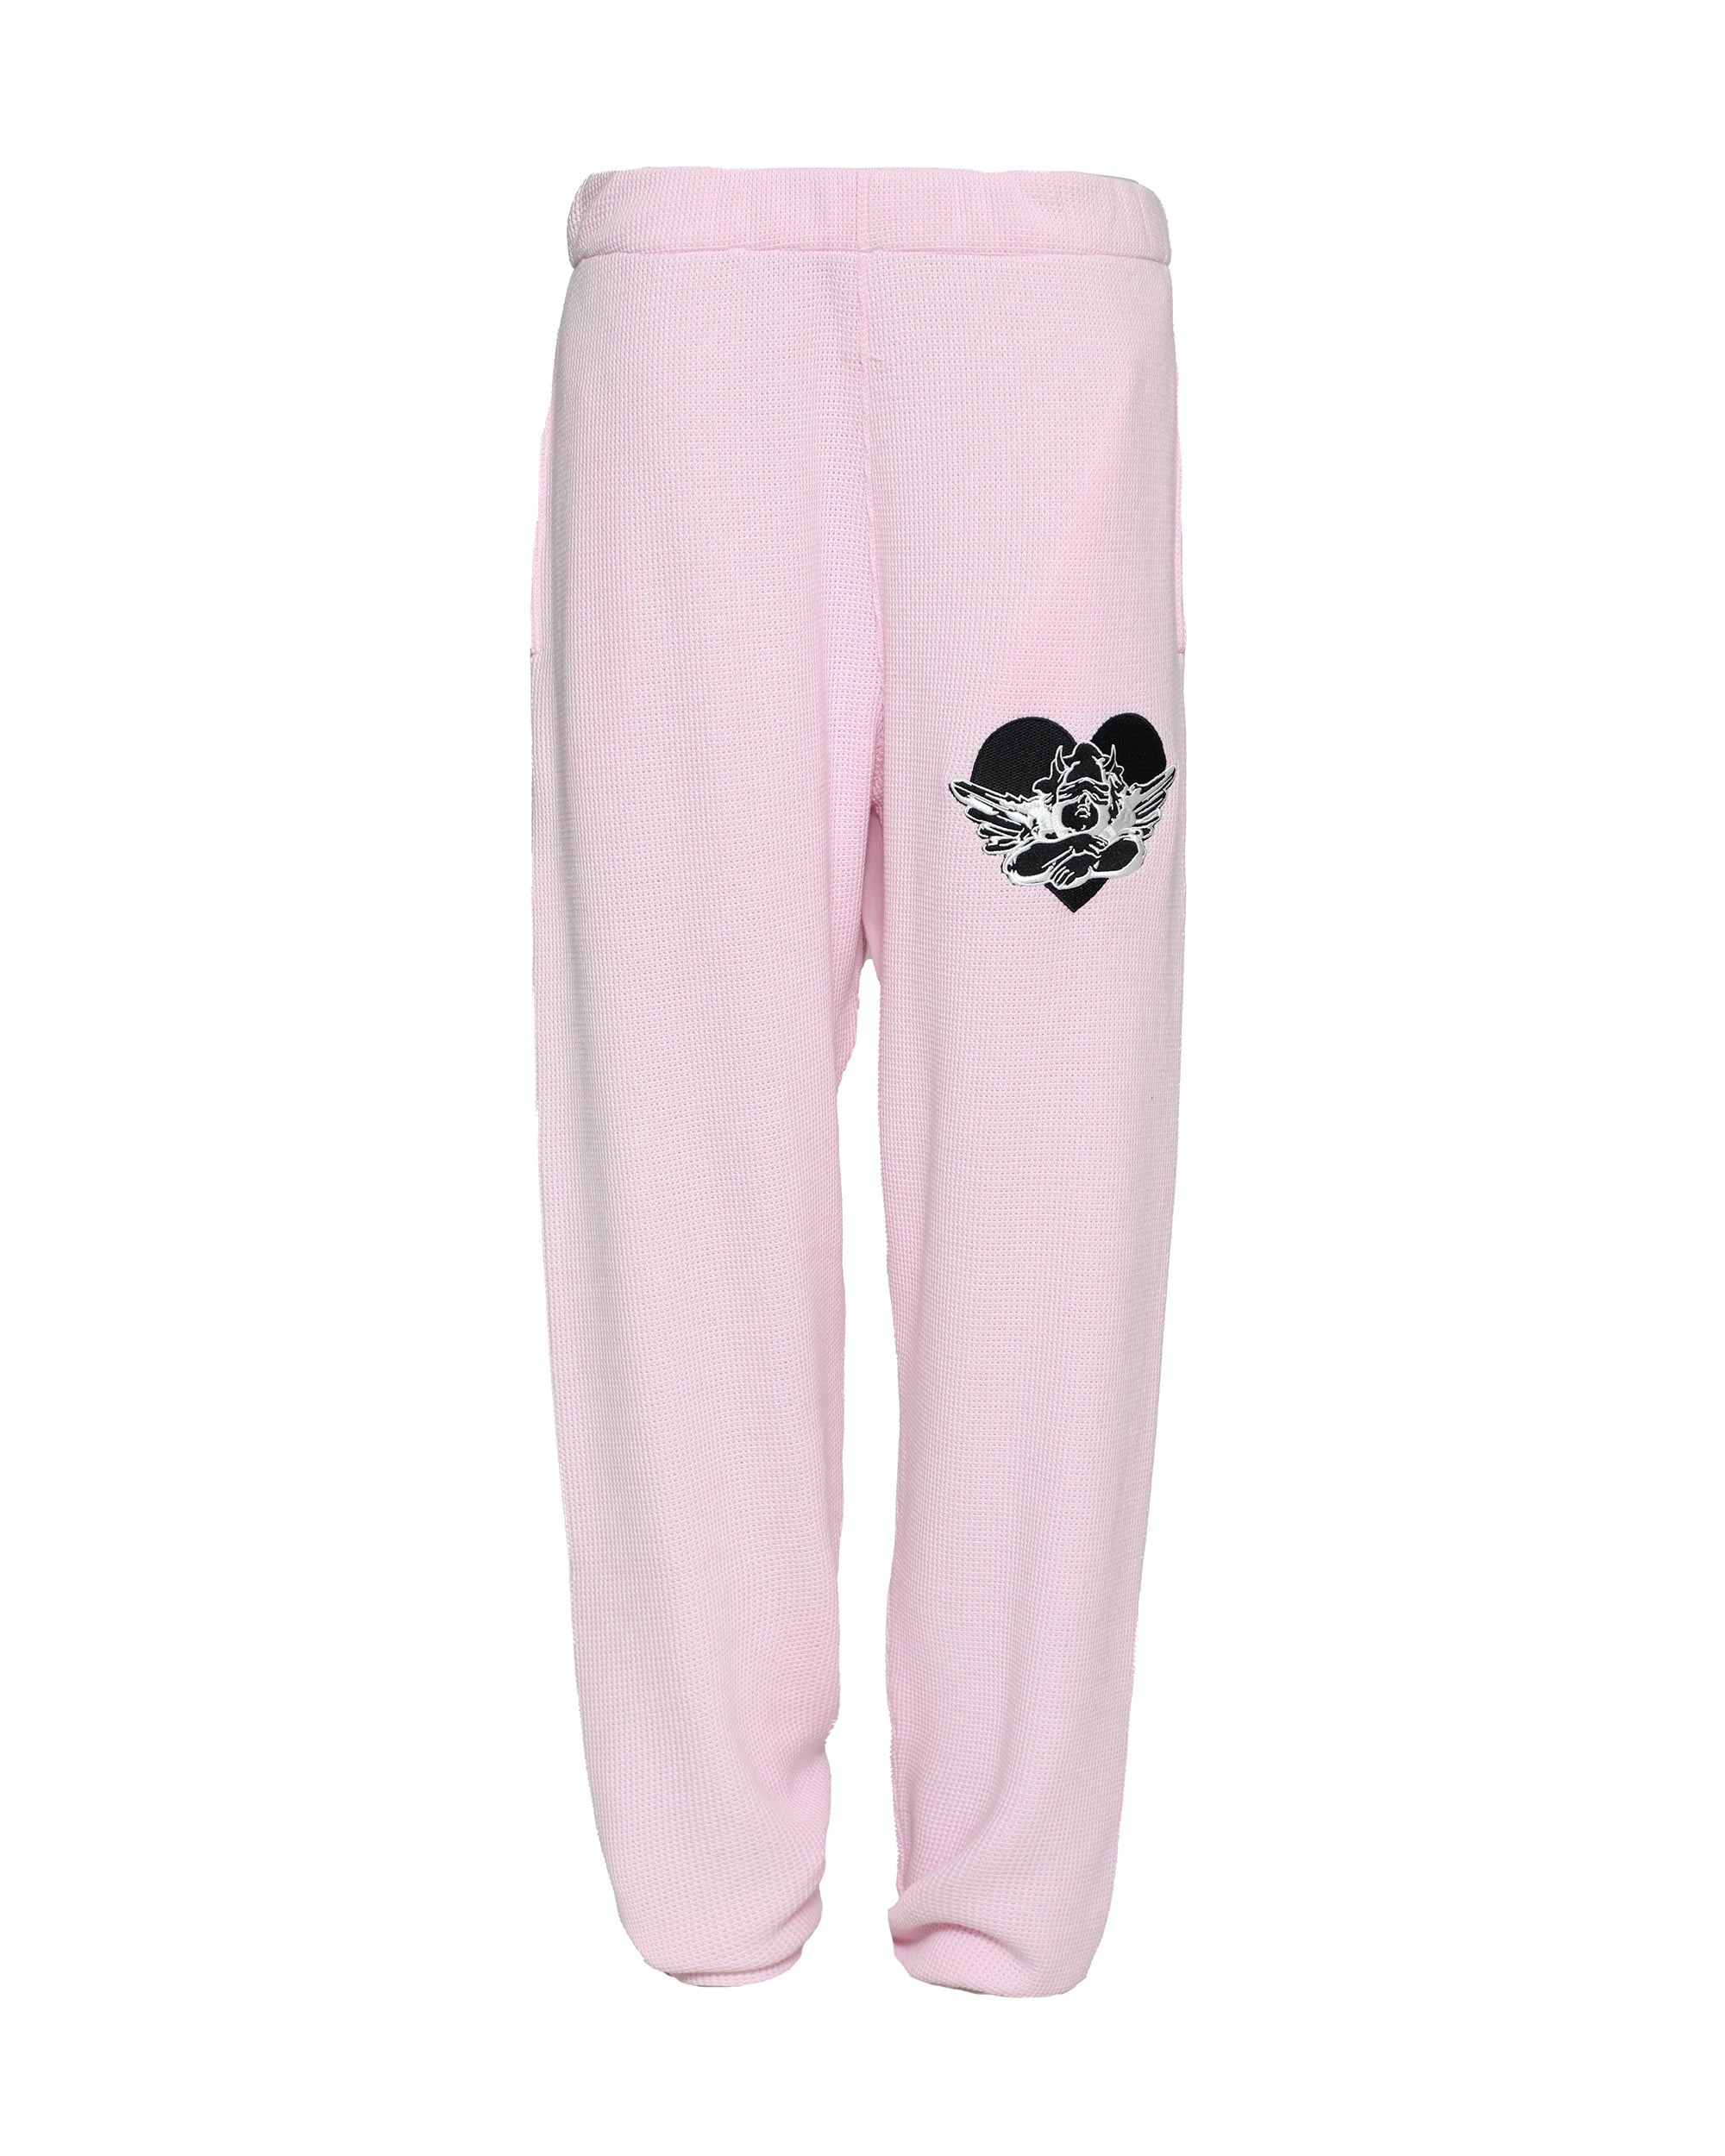 Yours Truly Thermal Mac Slim Sweatpants